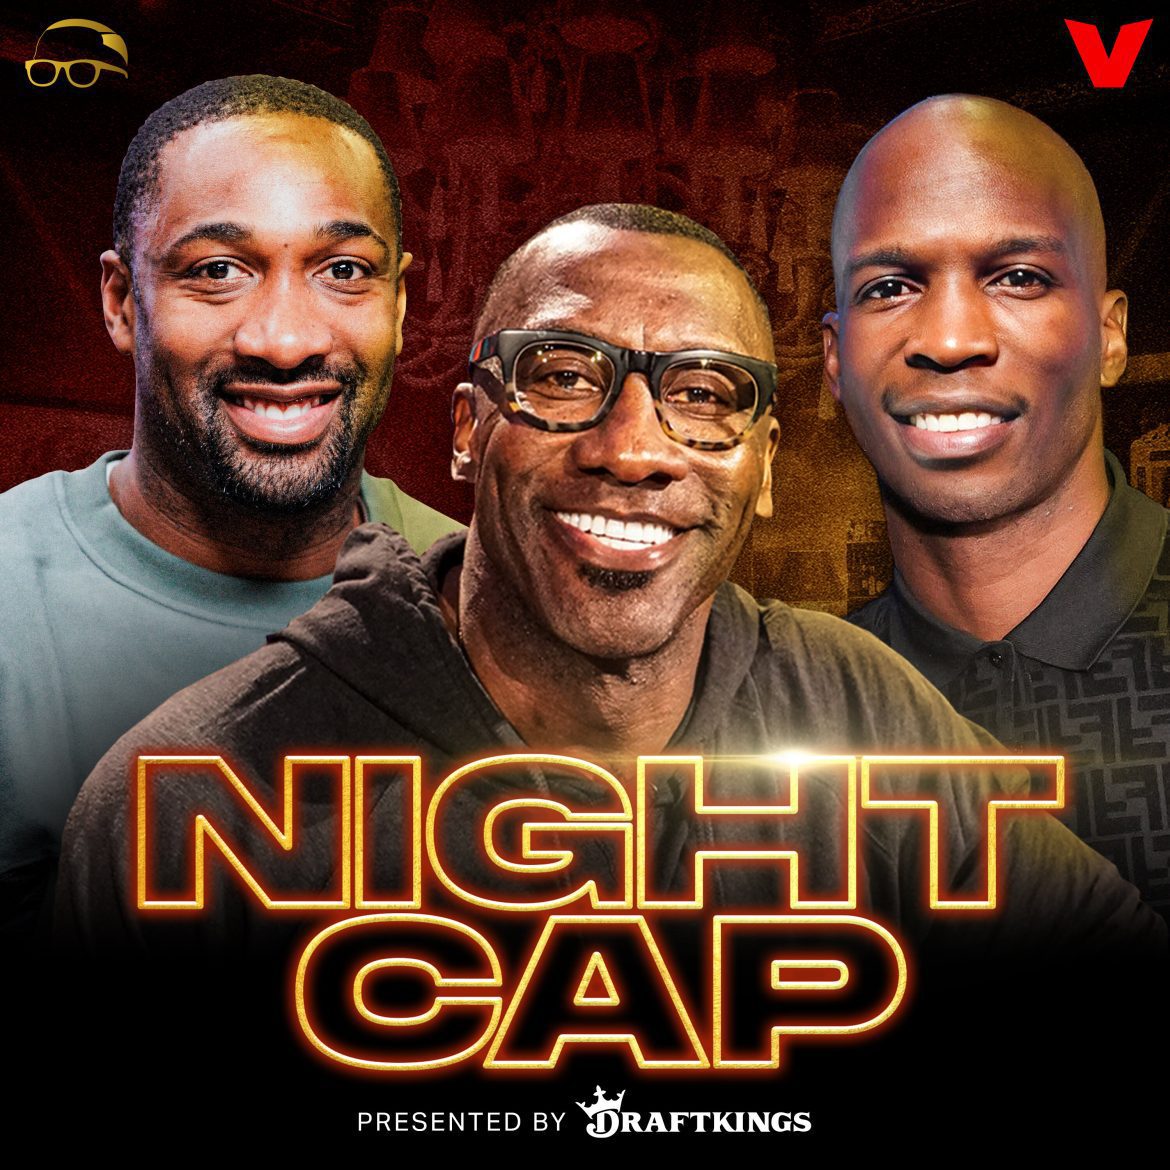 Black Podcasting - Best of Nightcap - Funniest moments from Shannon Sharpe testing Chad Johnson’s spelling abilities